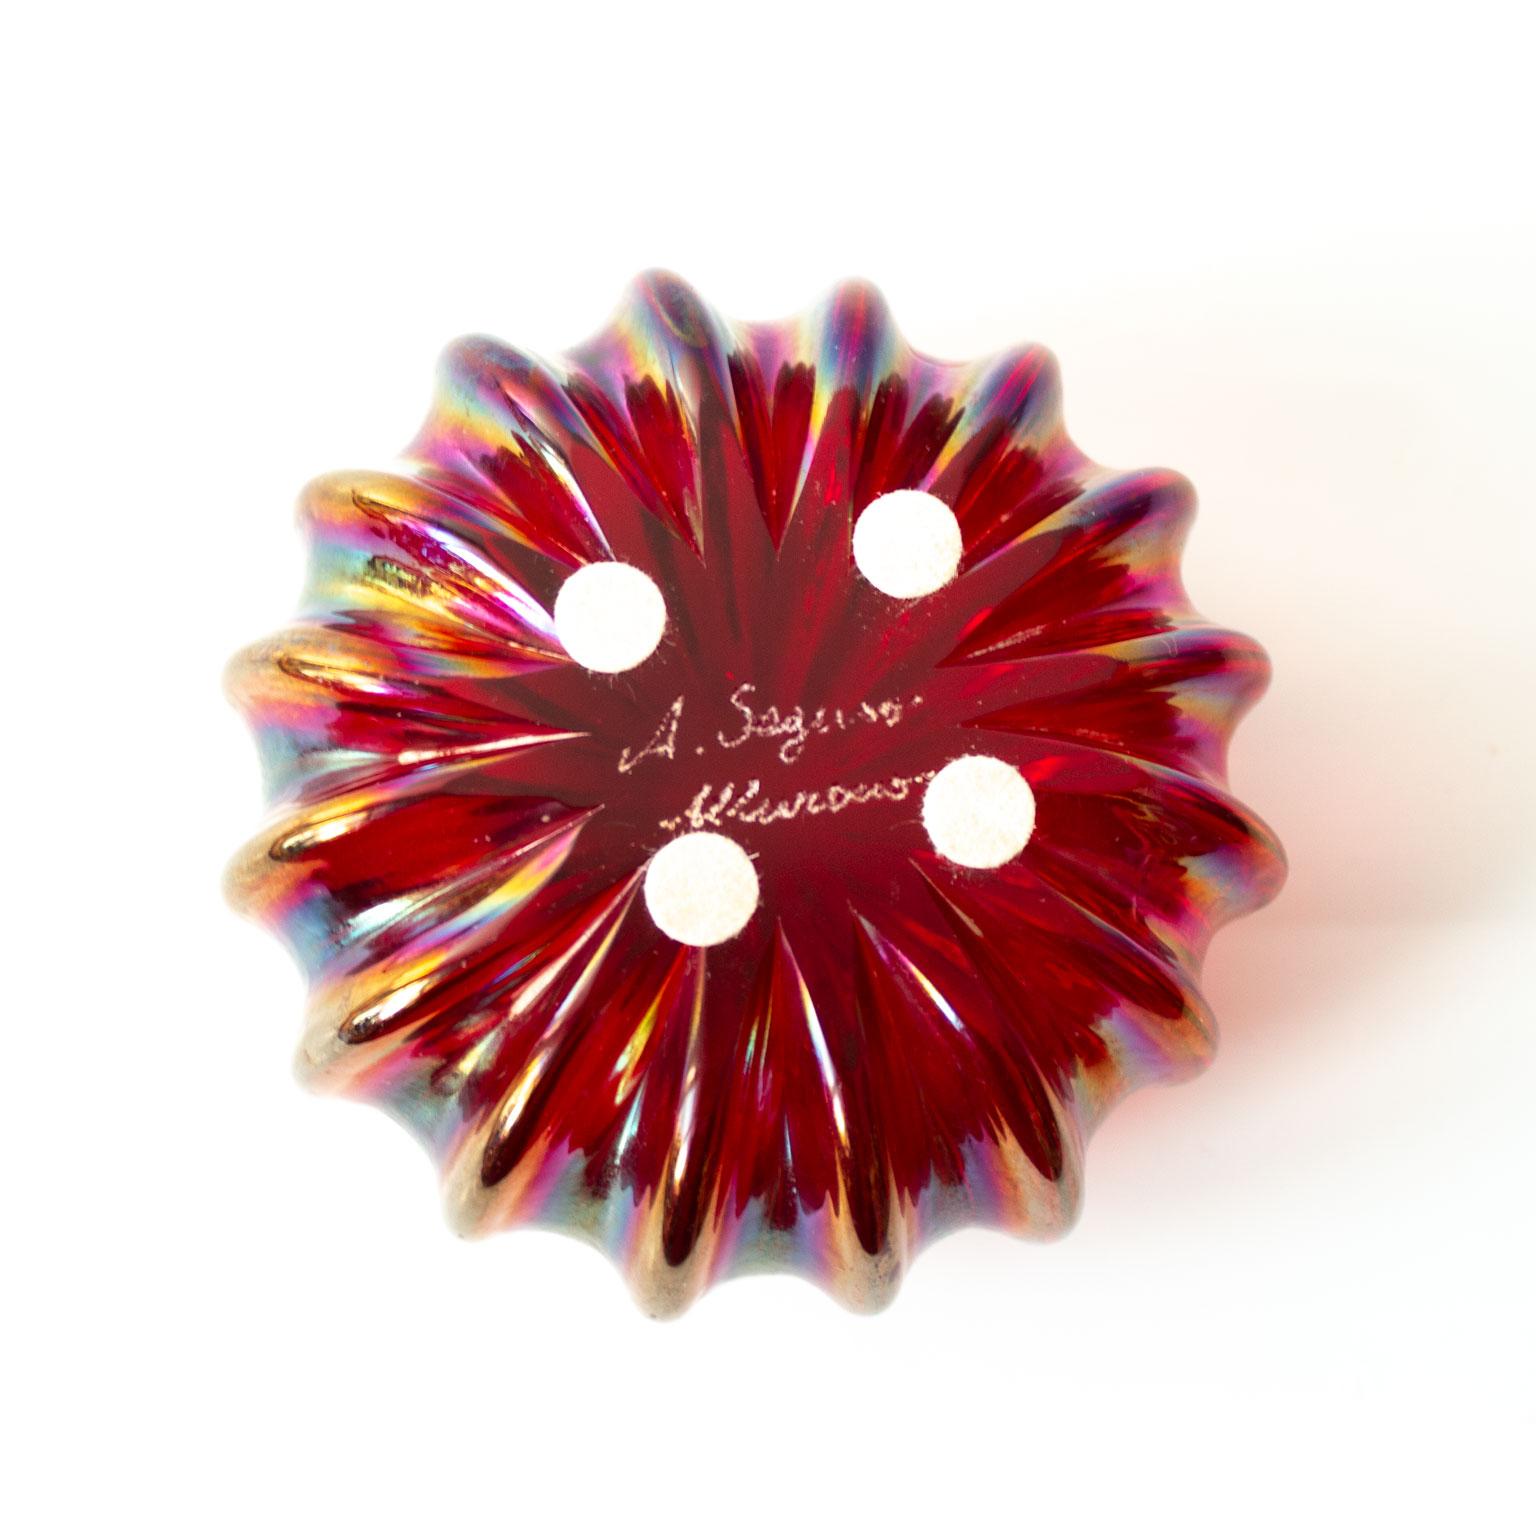 Mid-Century Modern Signed Archimede Seguso Glass Ruby Red Paperweigh. Made in Murano, Italy